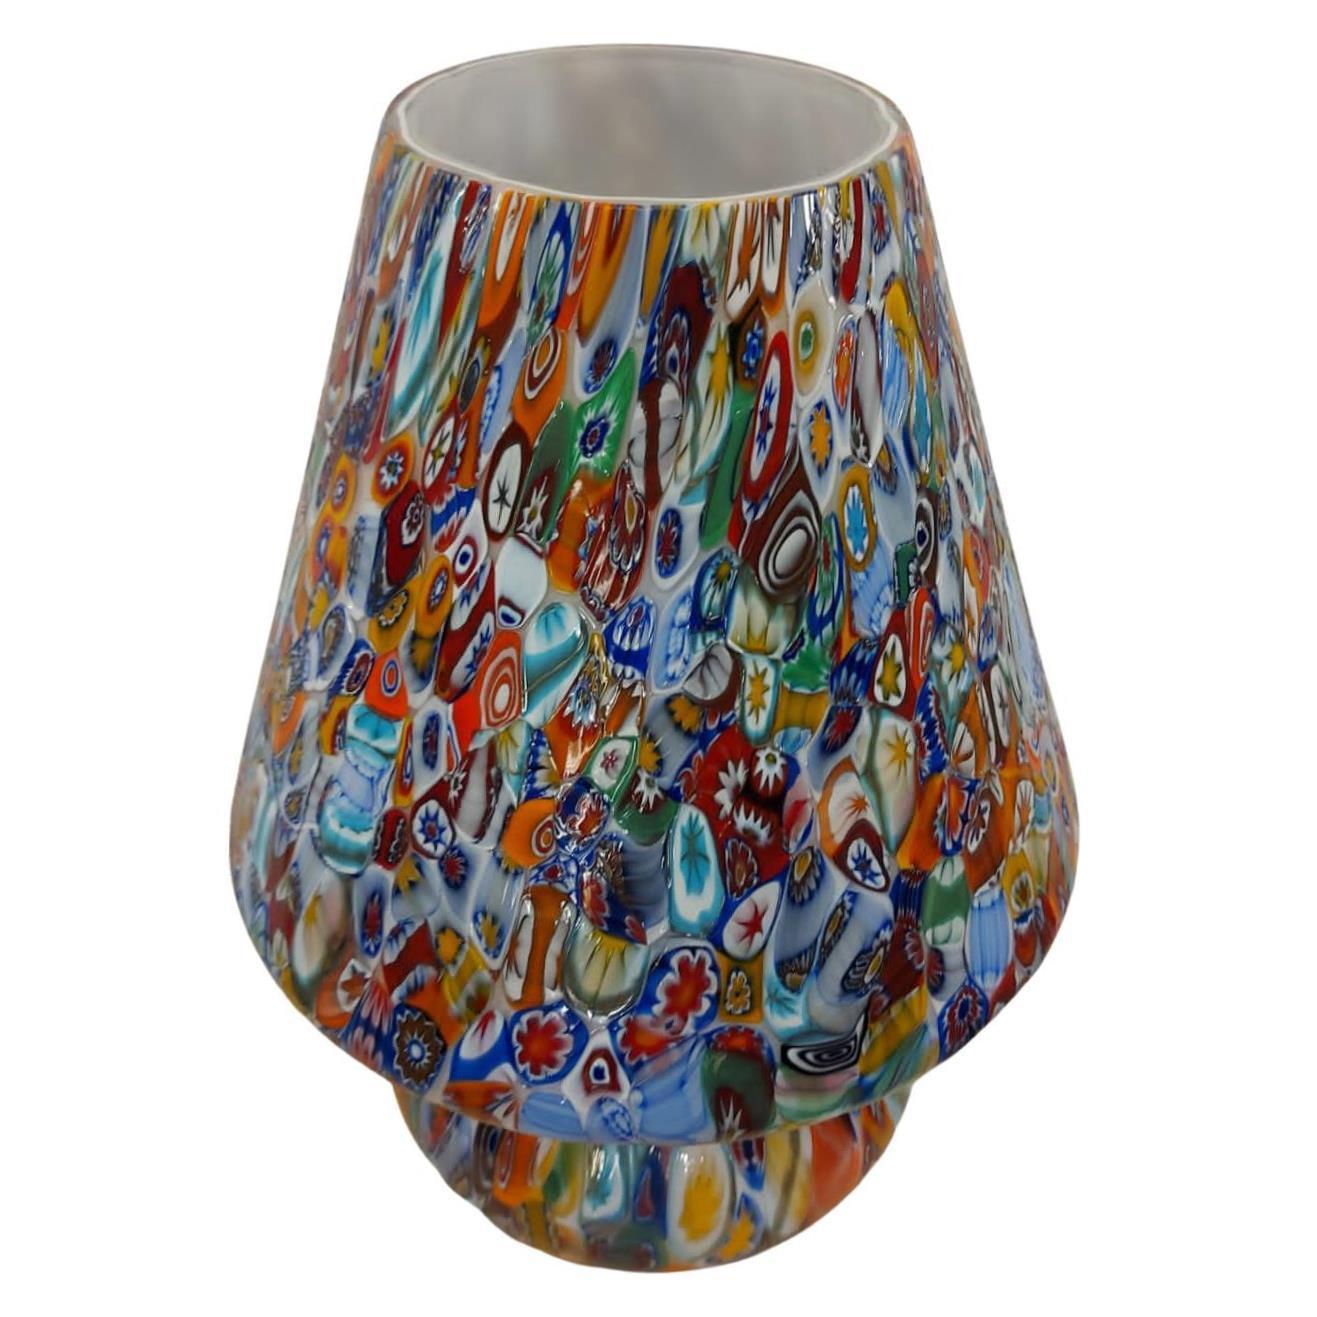 Pair of Big Hancrafted Murano Table Lamps Murrine Millefiori Decor, Italy 2000's For Sale 3